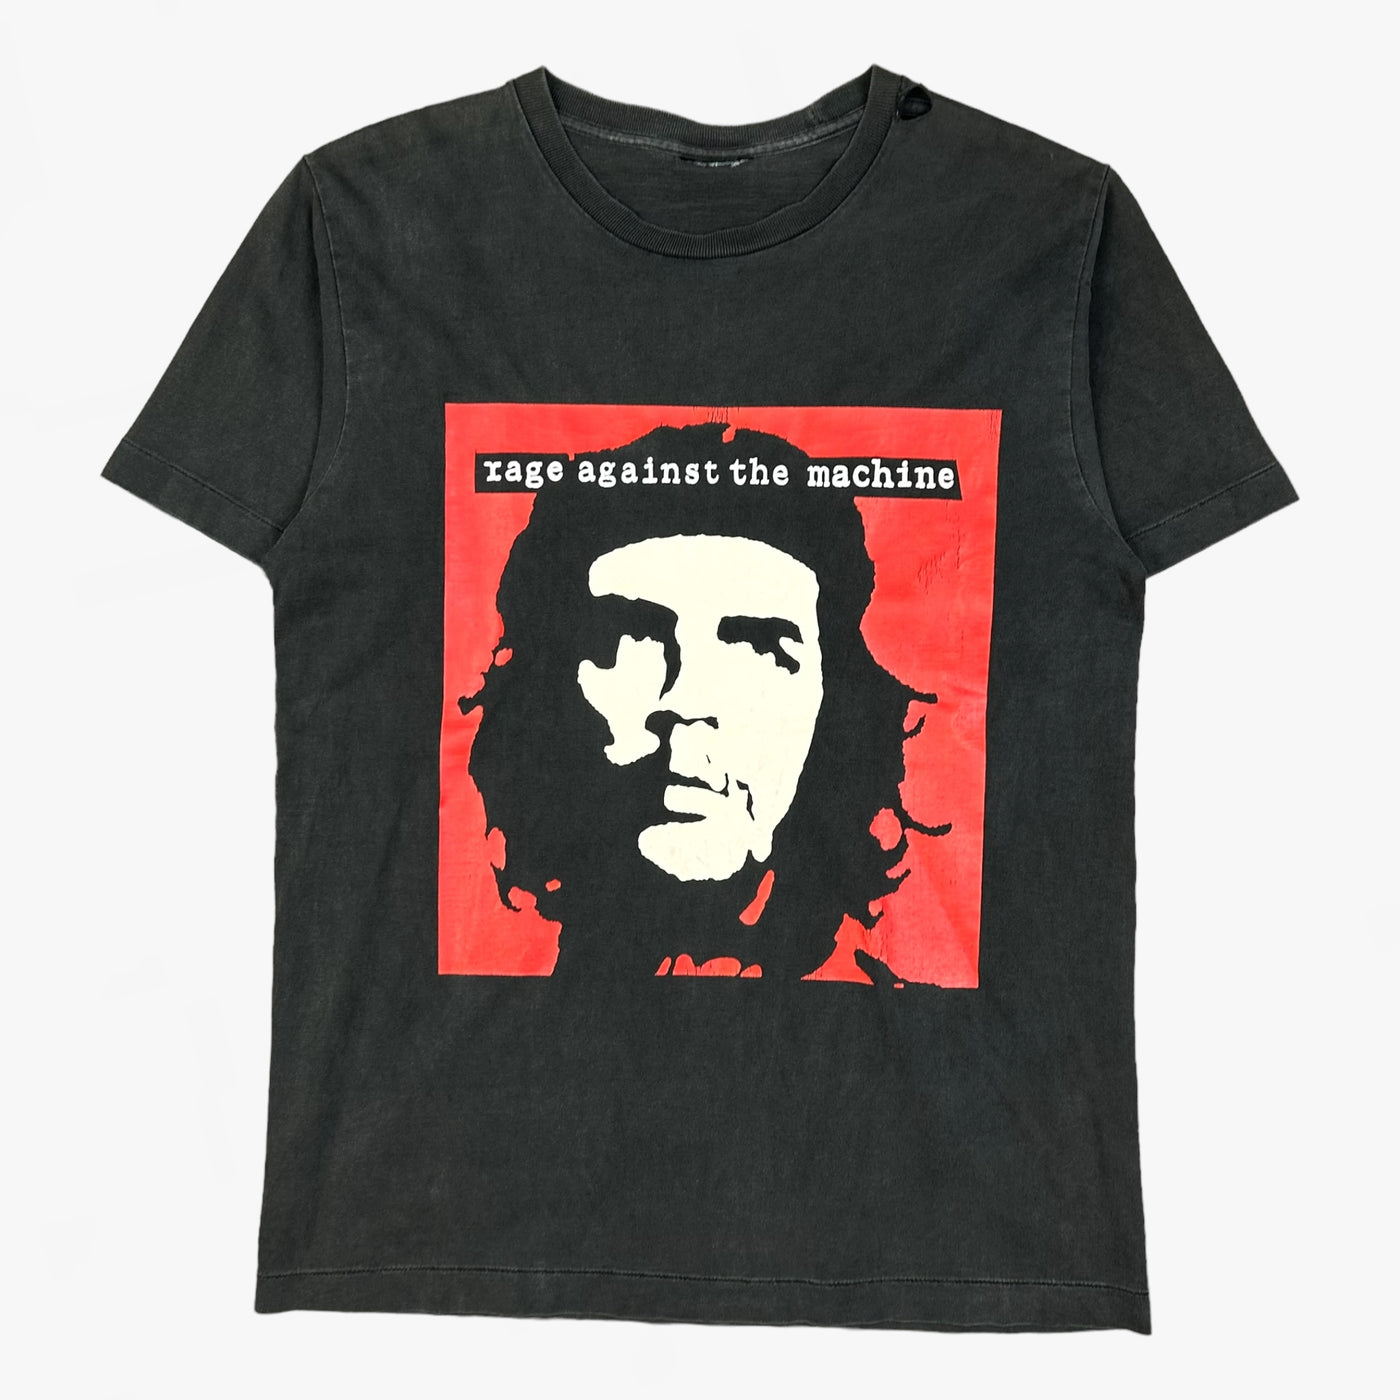 LATE 90S RAGE AGAINST THE MACHINE T-SHIRT